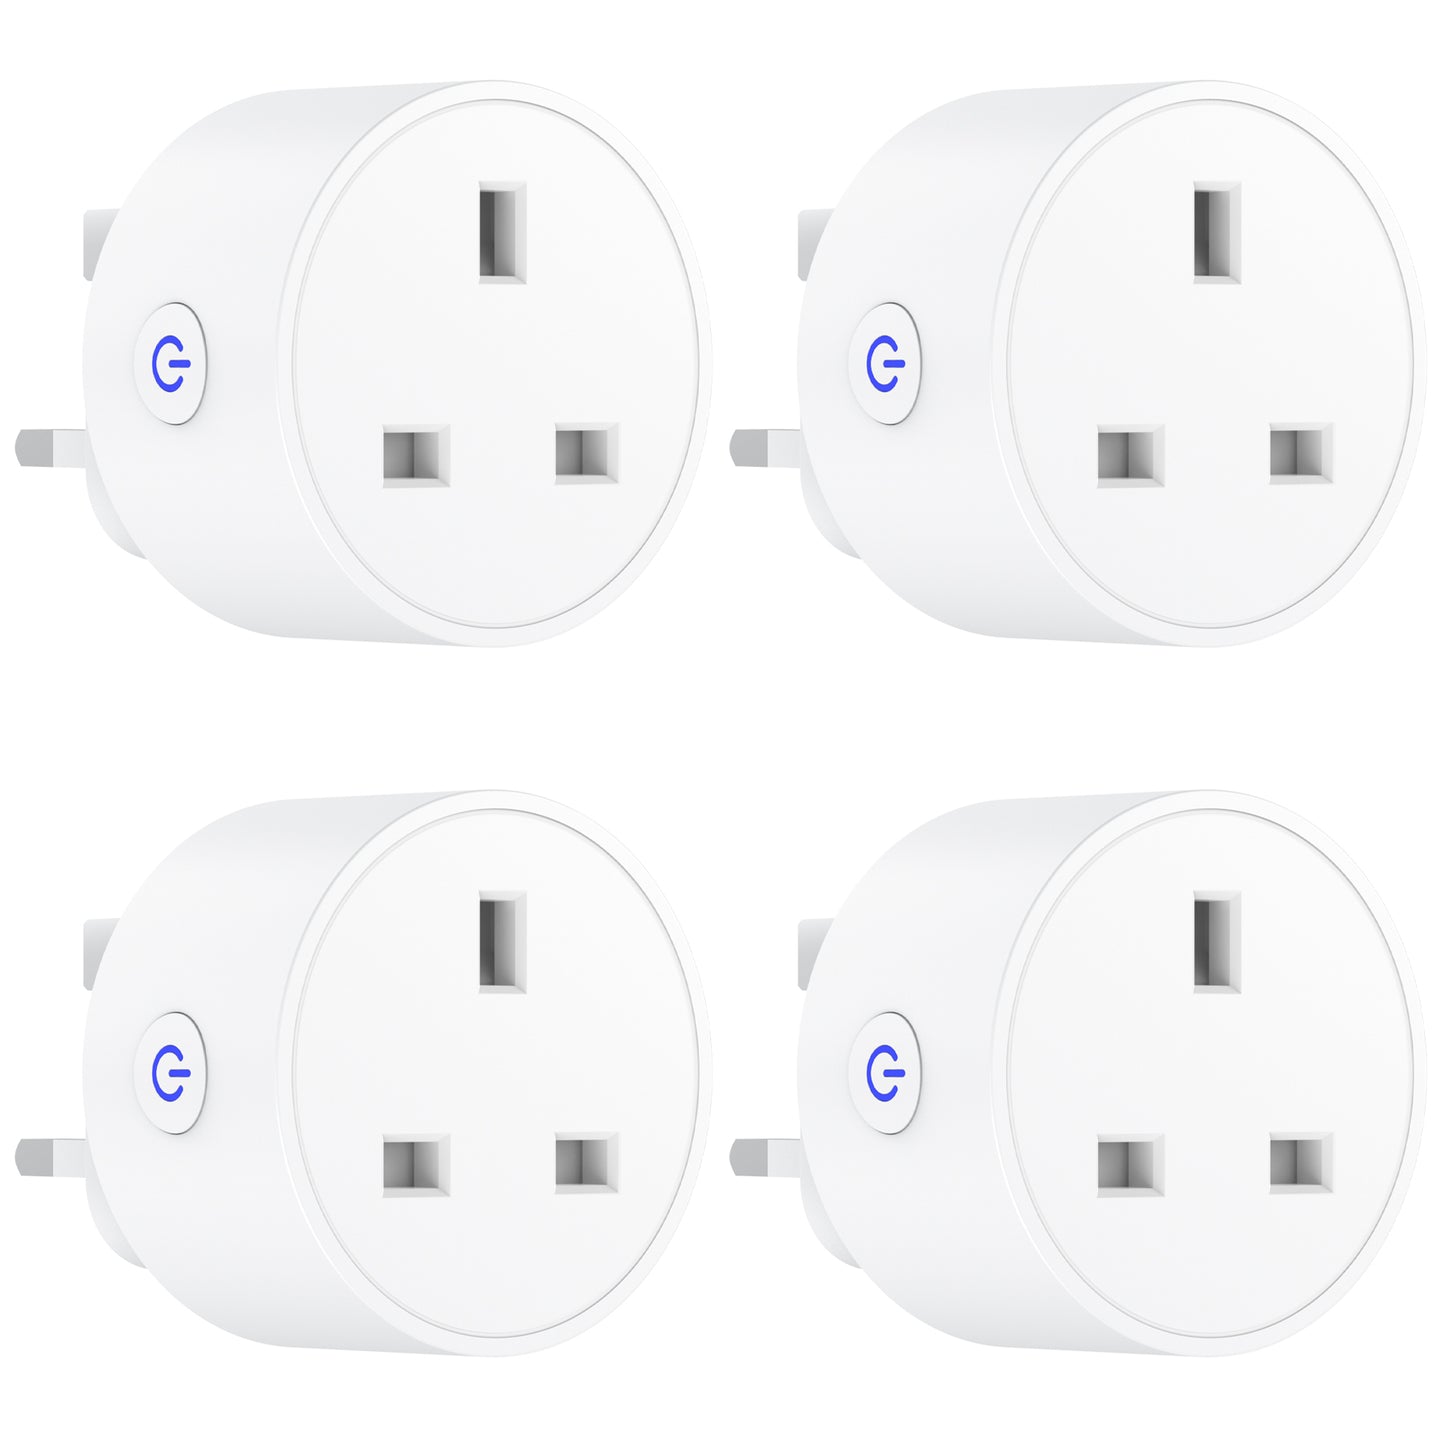 EIGHTREE Smart Plug, Alexa Smart Plugs That Work with Alexa and Google  Home, Compatible with SmartThings, Smart Outlet with WiFi Remote Control  and